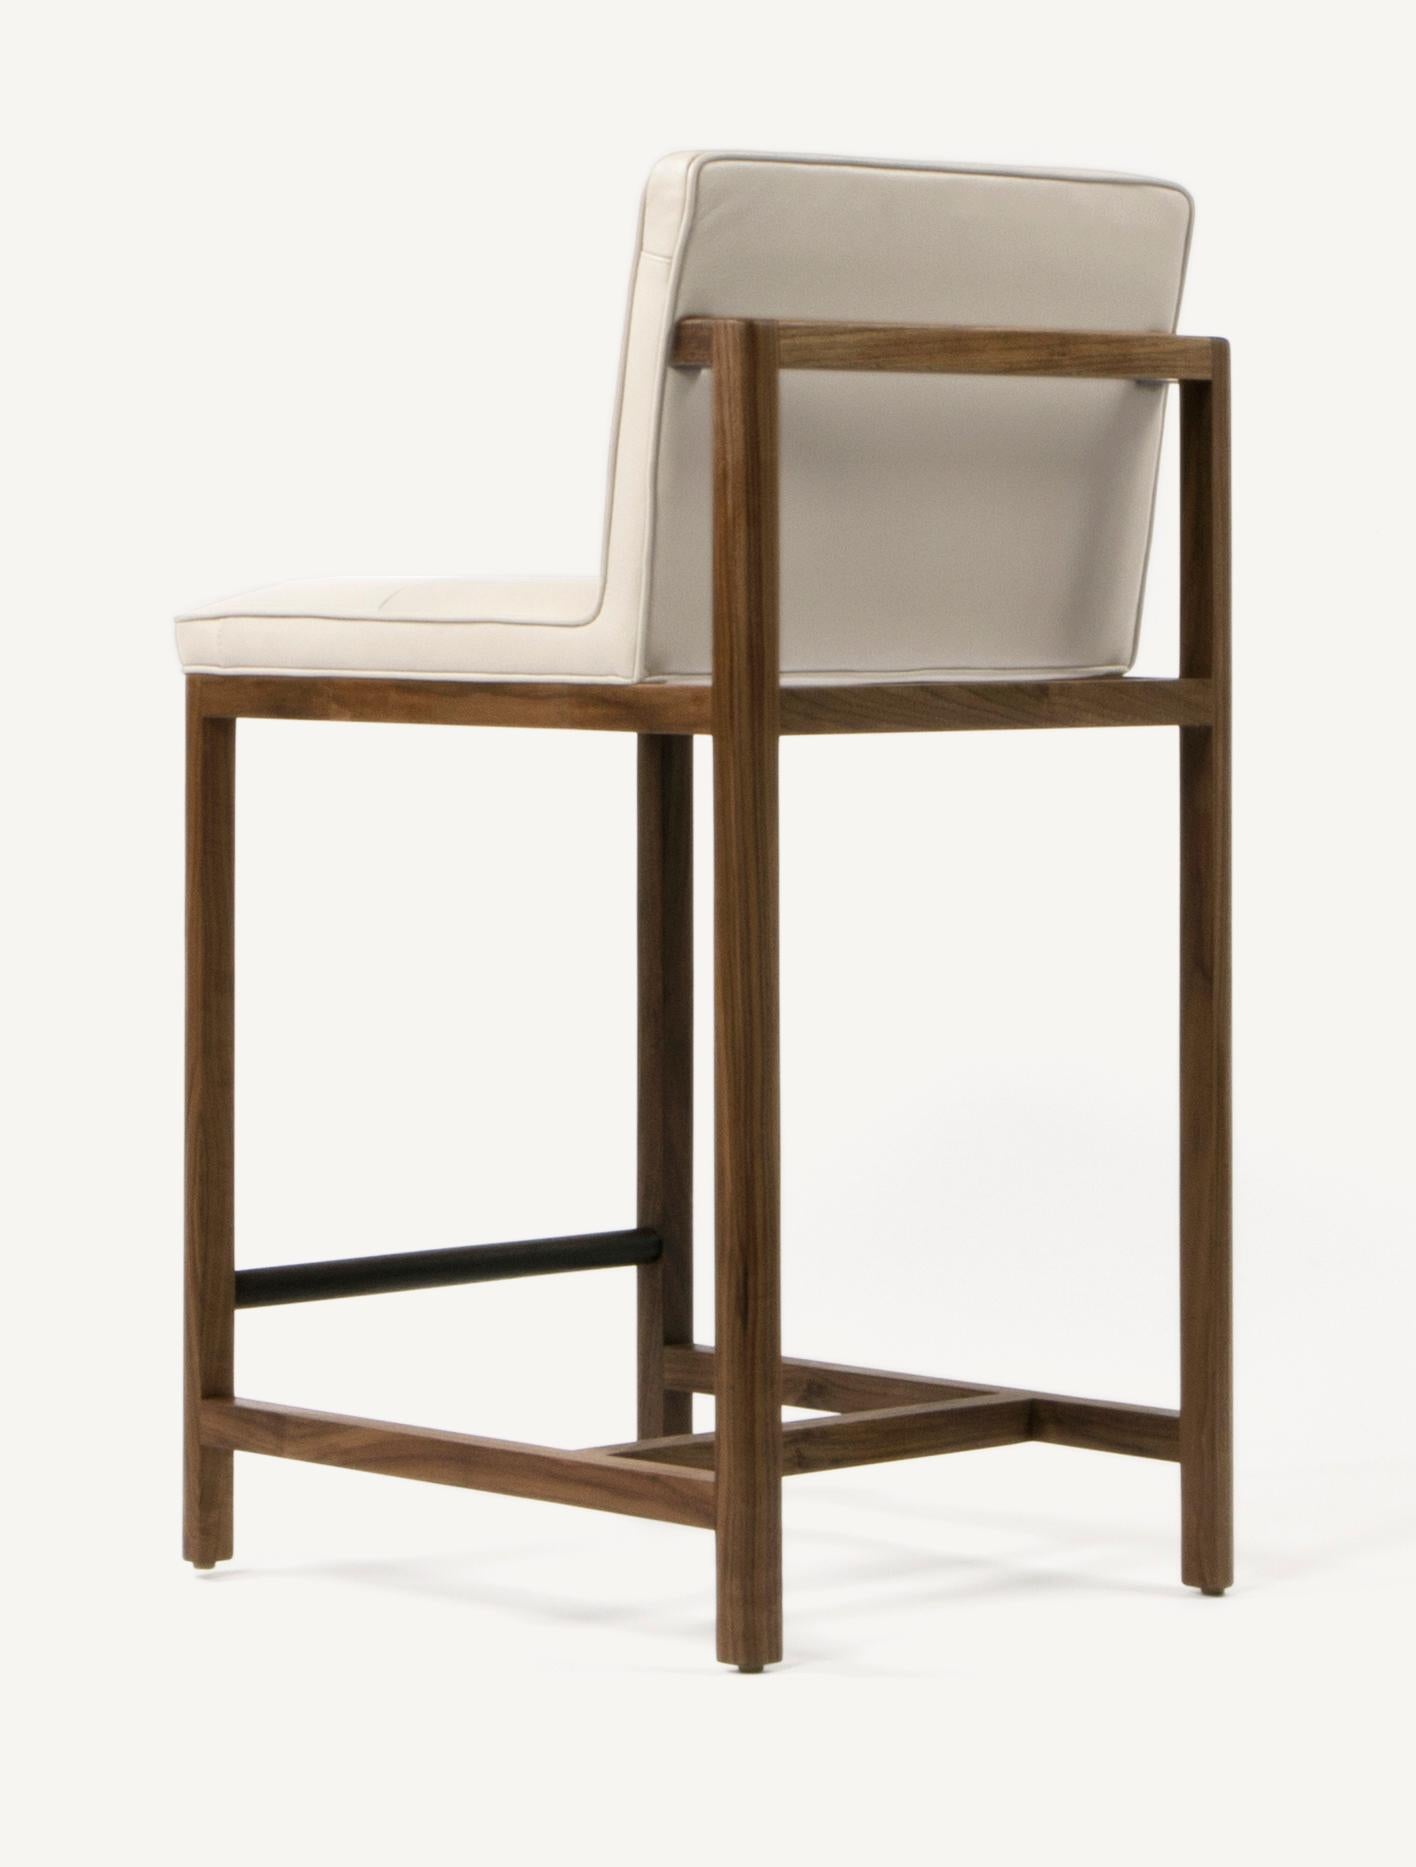 For Sale: Gray (Comfort 12114 Gray Beige) Wood Frame Counter Stool in Walnut and Leather Designed by Craig Bassam 2